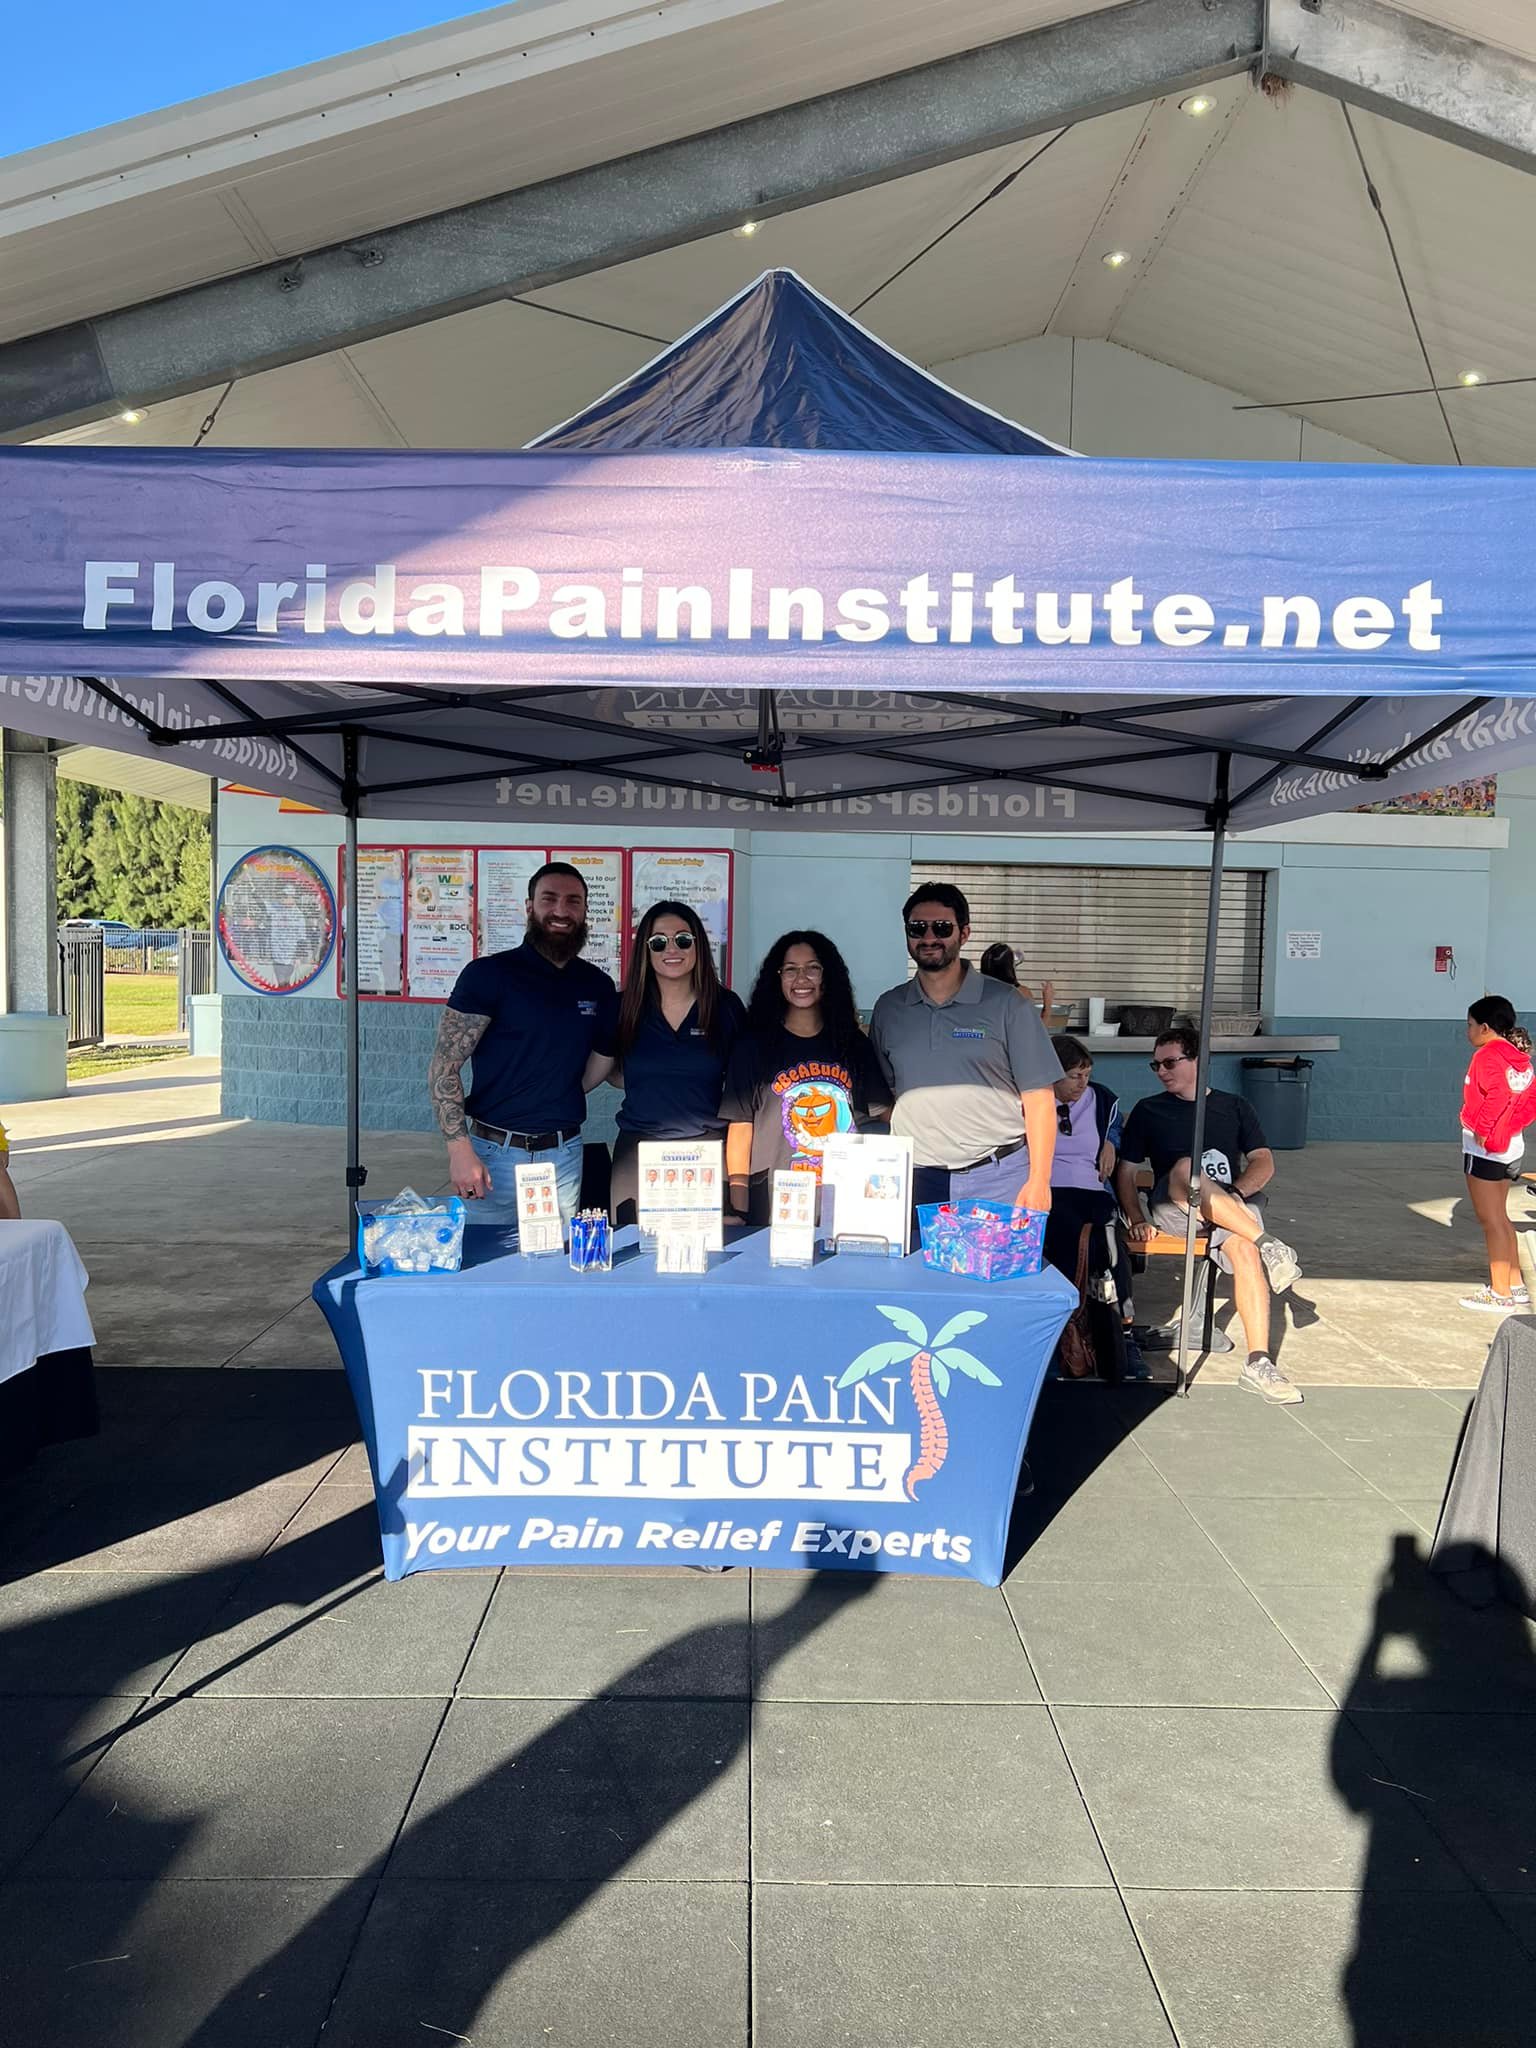 Two men and two women stand behind a table underneath a large tent. The tent and table banner are labeled Florida Pain Institute.